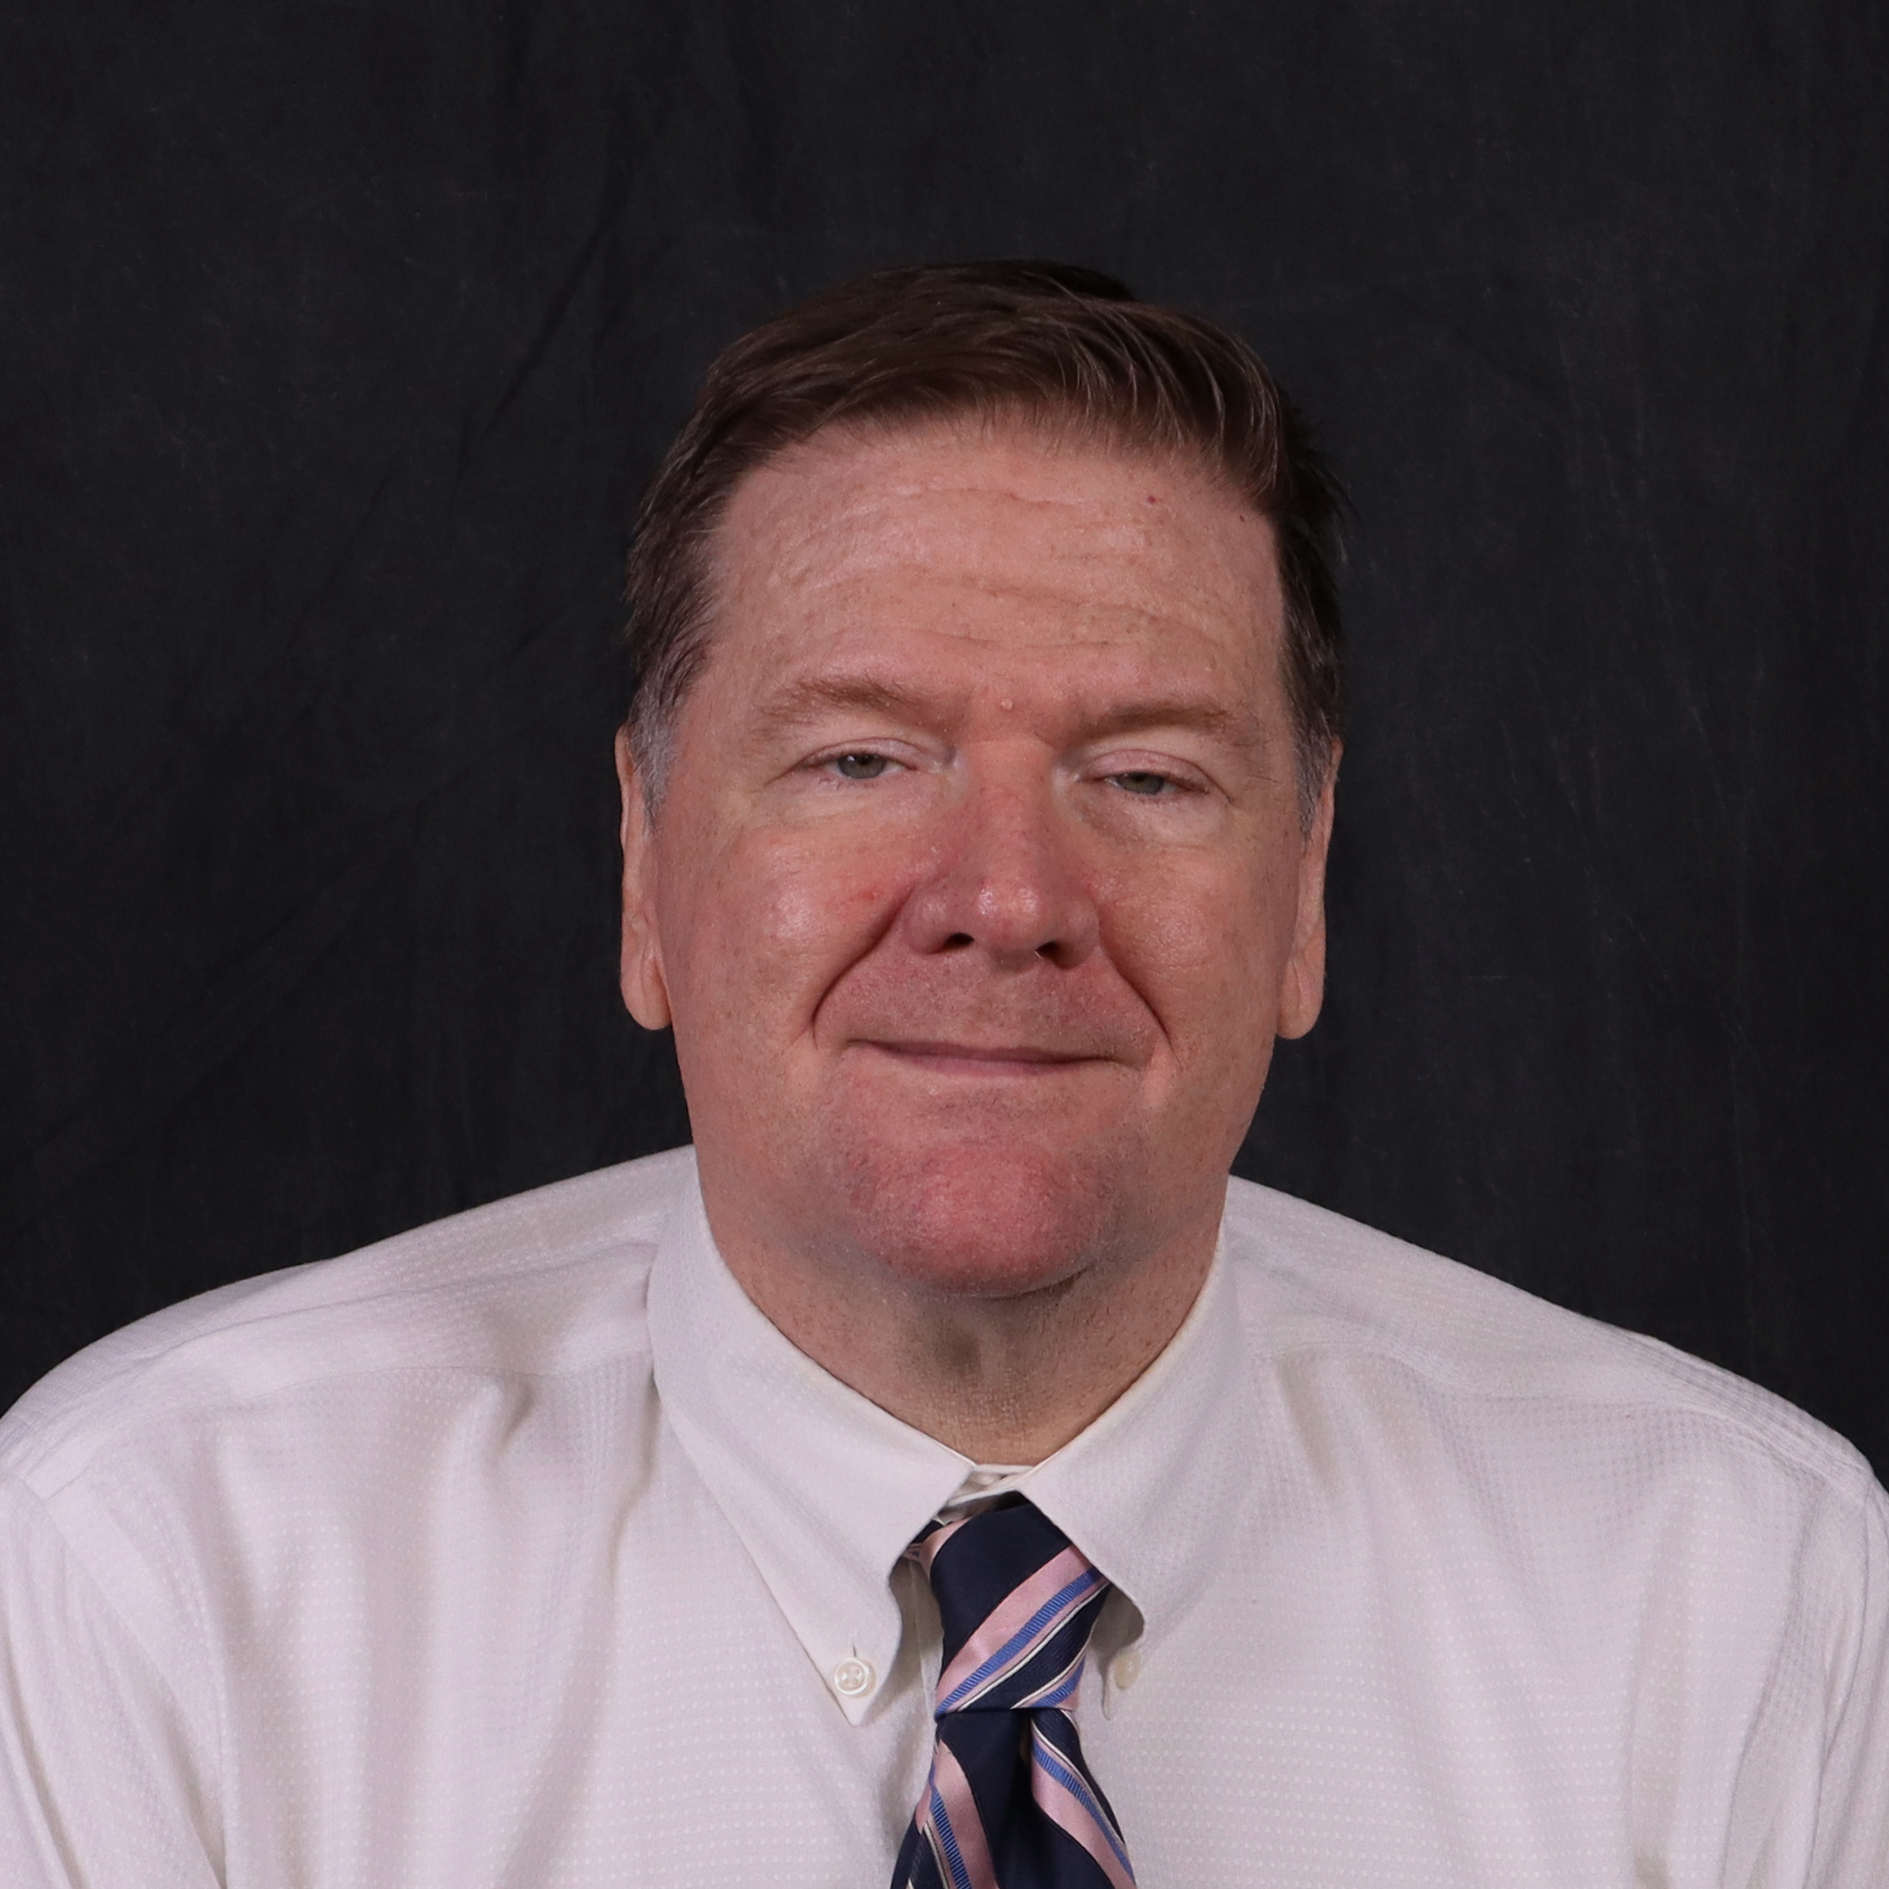 Headshot of Ron Venable with a white shirt and tie against a dark background.